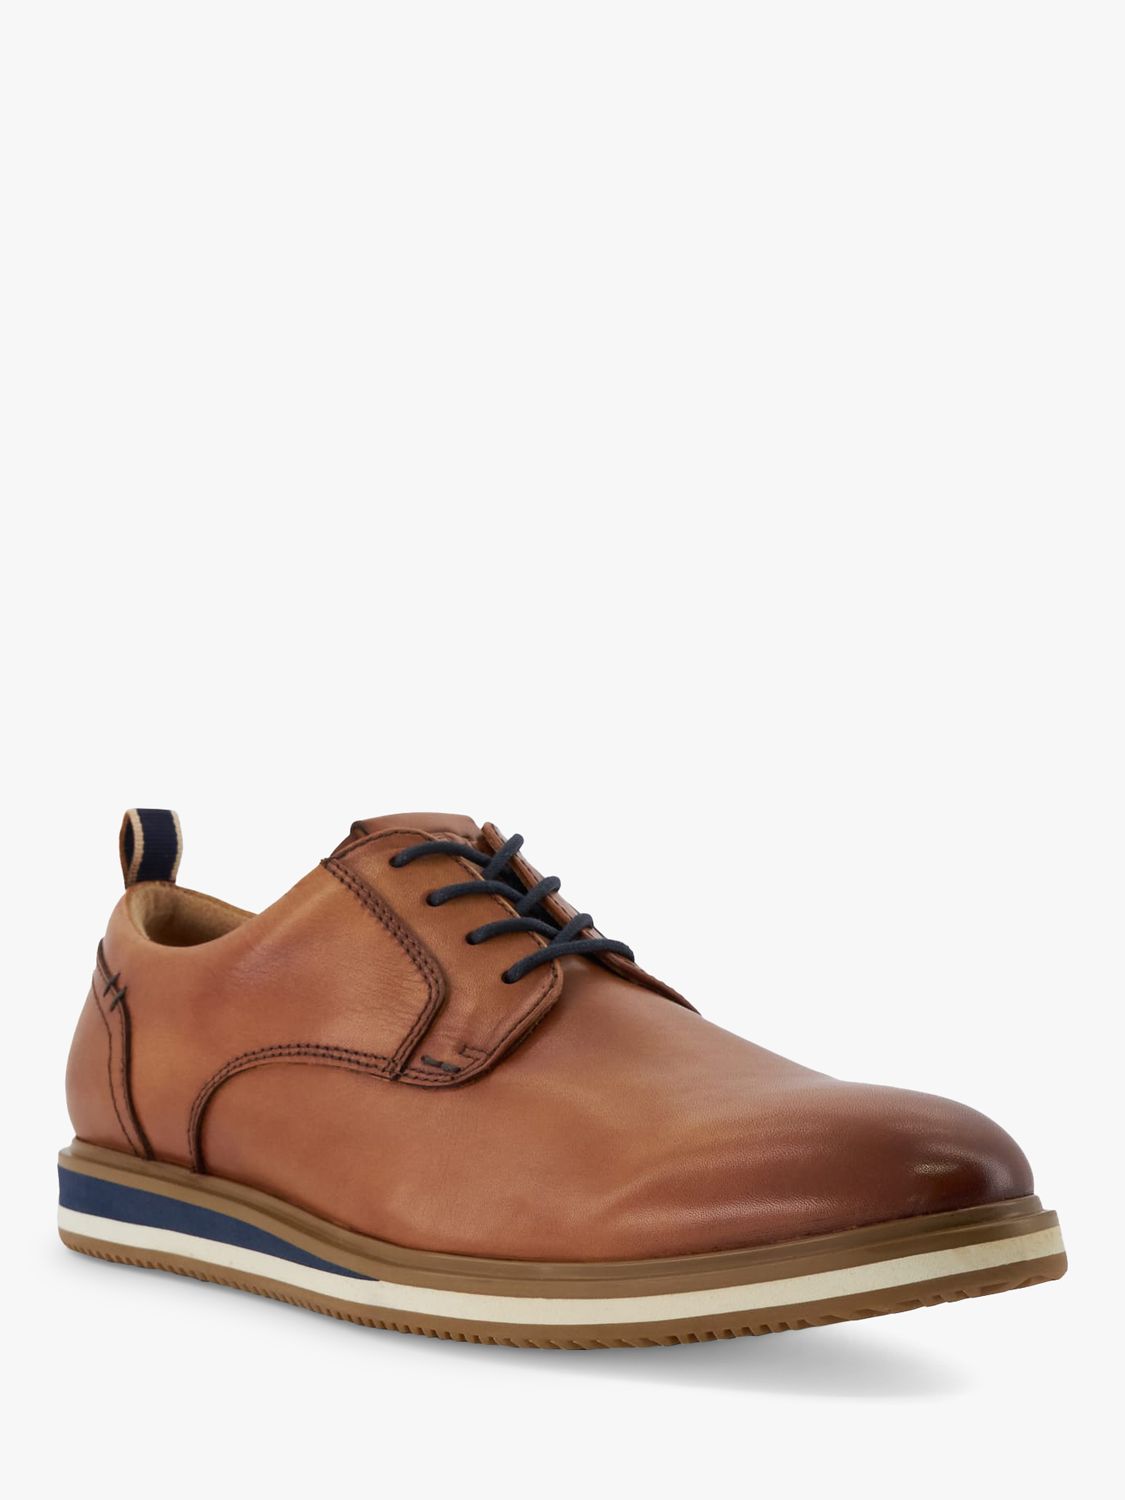 Buy Dune Blaksley Leather Lace-Up Shoes, Tan Online at johnlewis.com